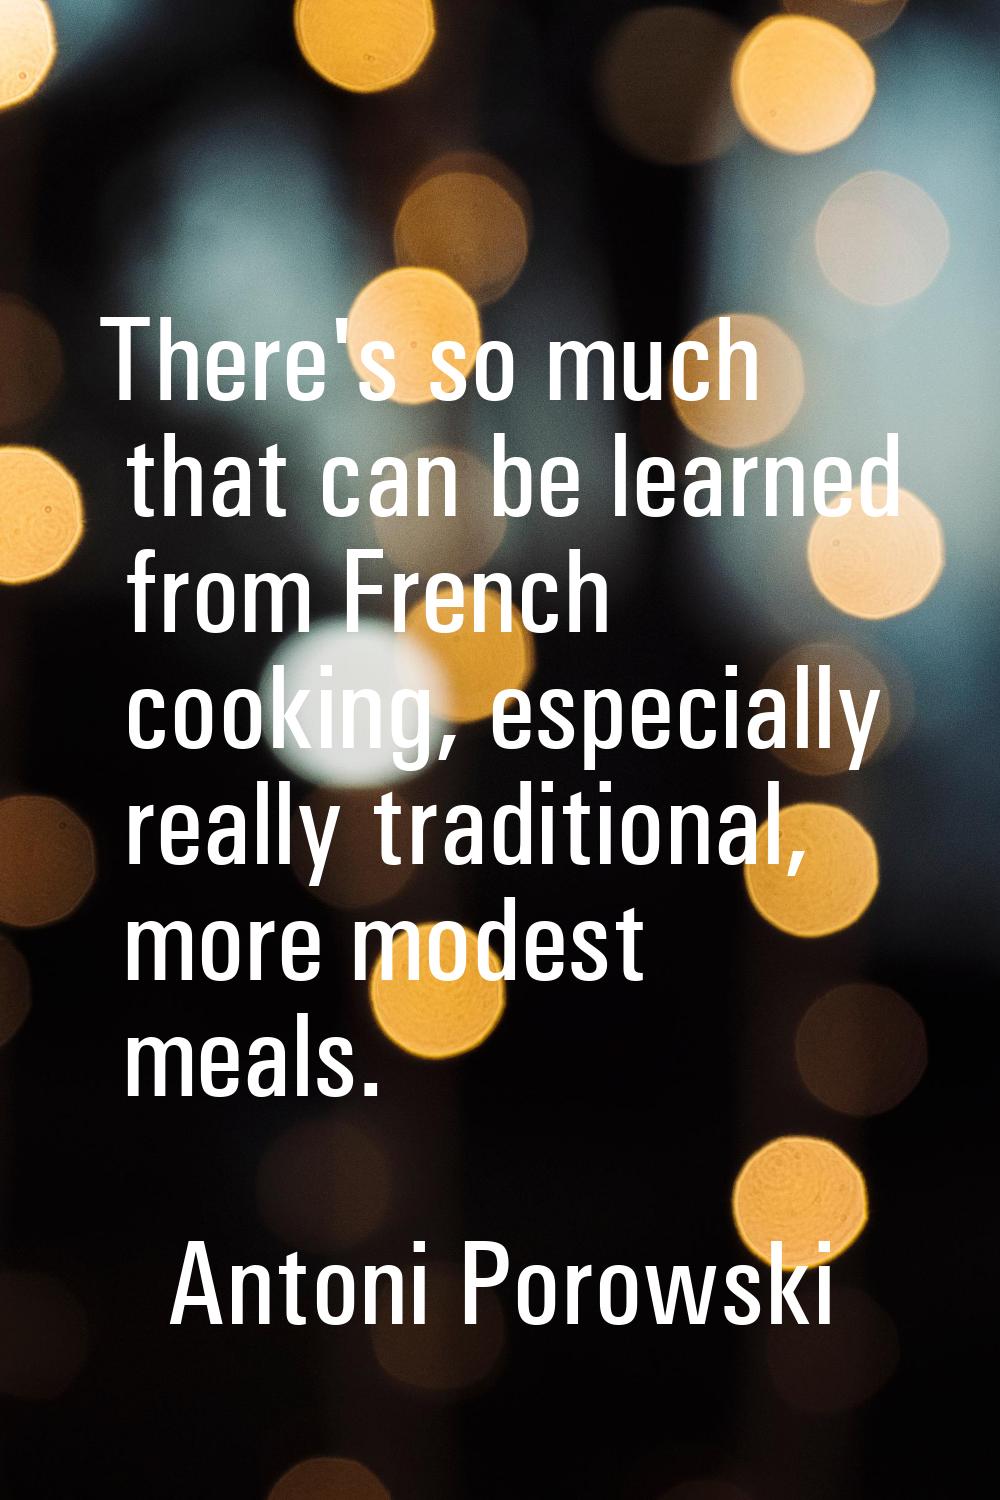 There's so much that can be learned from French cooking, especially really traditional, more modest